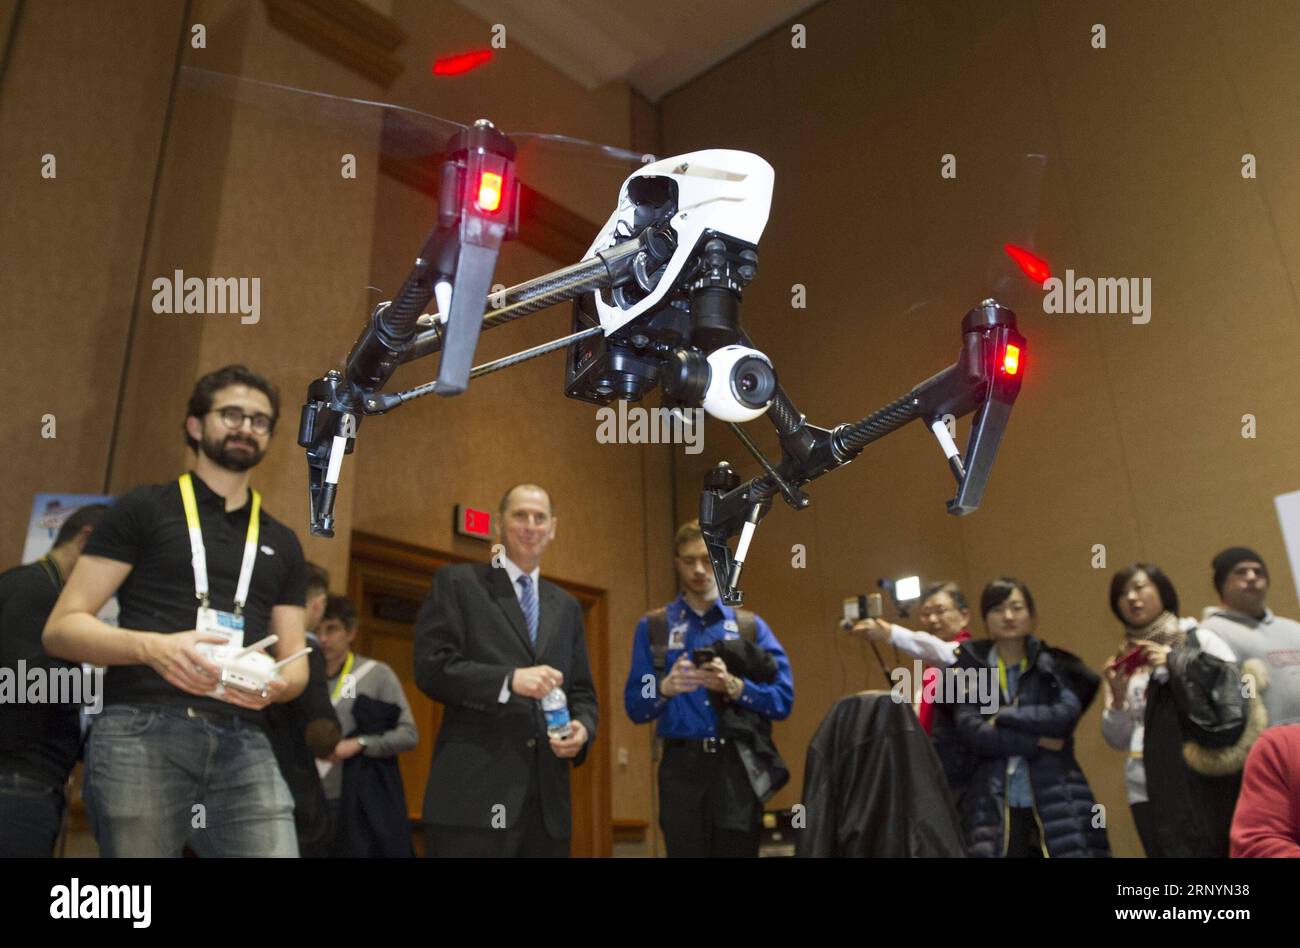 (180327) -- BEIJING, March 27, 2018 -- Representatives from Chinese DJI company show Inspire 1 quadcopter during the preview media show of The Consumer Electronics Show (CES) in Las Vegas, the United States, Jan. 4, 2015. A huge trade deficit with China is reportedly behind the U.S. administration s plan to slap tariffs on up to 60 billion U.S. dollars of Chinese imports and restrict Chinese investment. But data sometimes lies, and could shield the bigger picture. ) (djj) Xinhua Headlines: Truth behind China-U.S. trade imbalances YangxLei PUBLICATIONxNOTxINxCHN Stock Photo